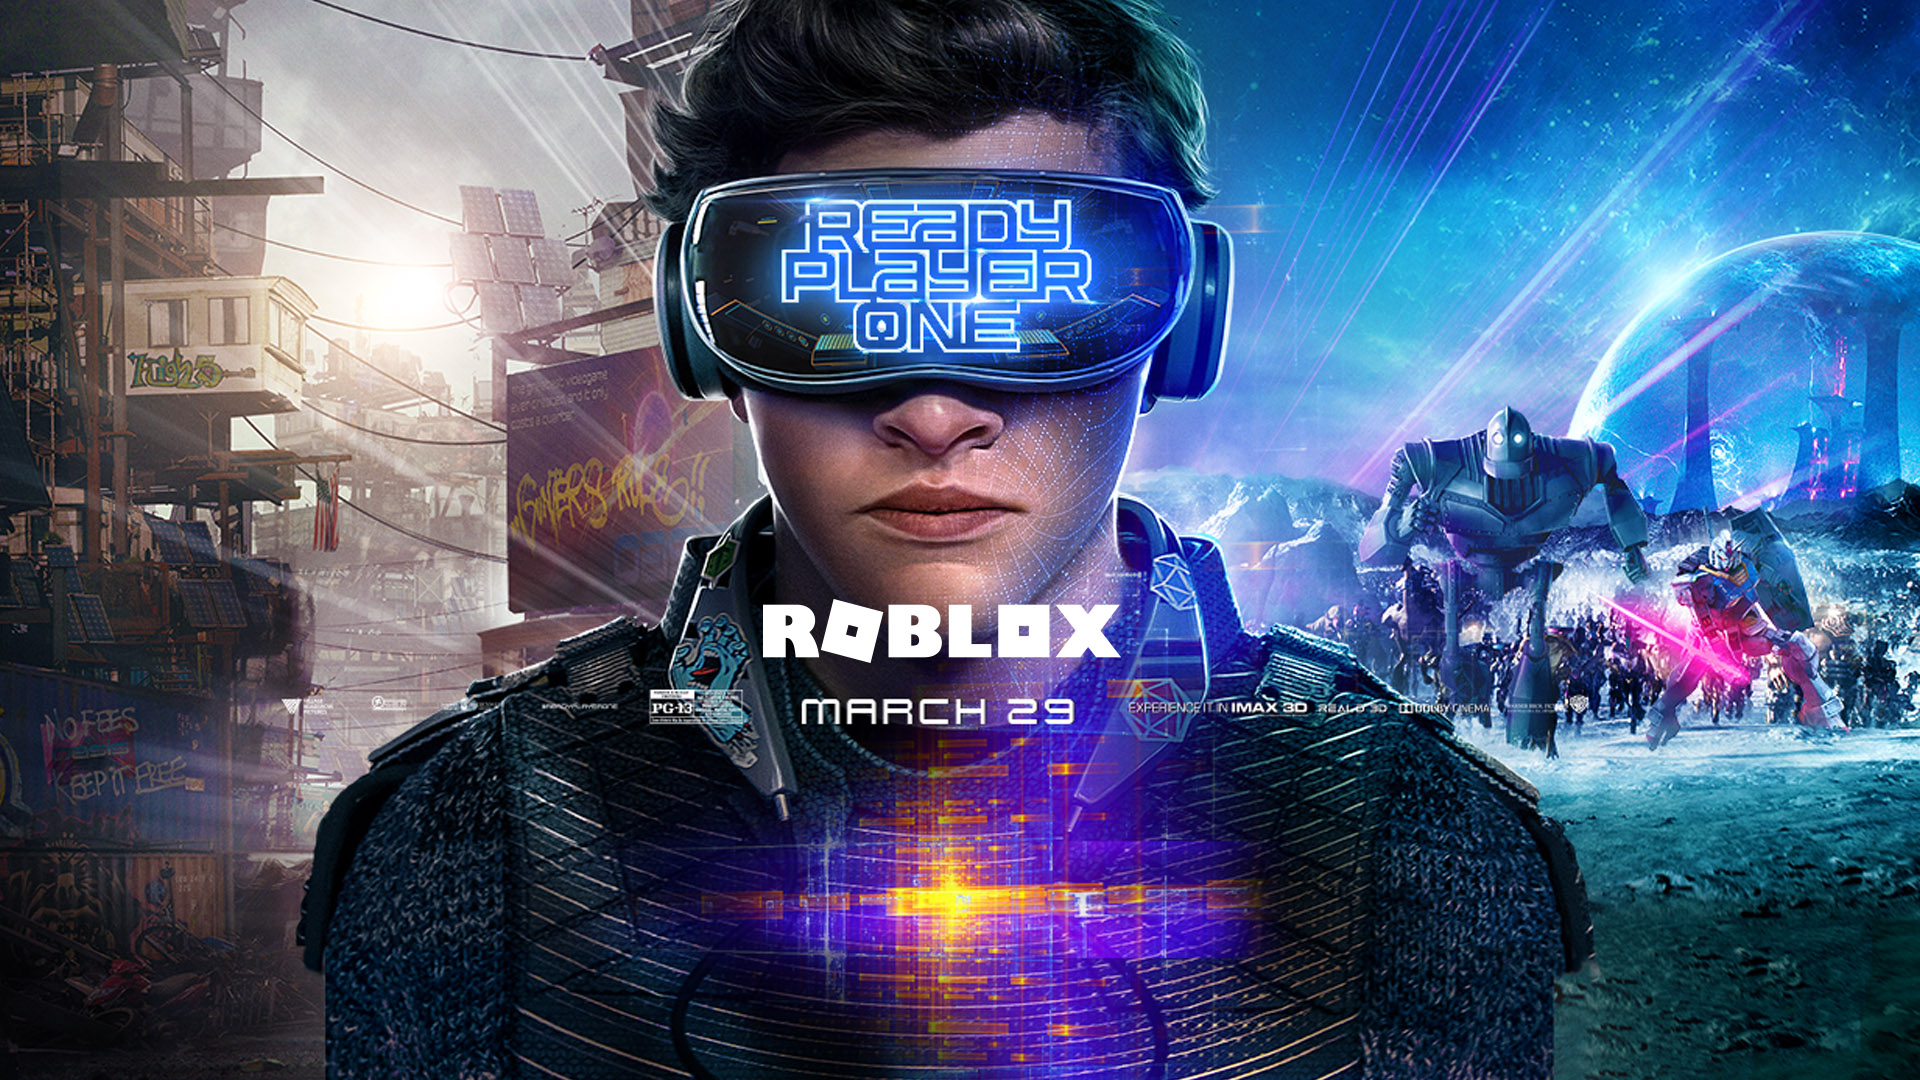 And The Winner Of The Roblox Ready Player One Adventure Is Roblox Blog